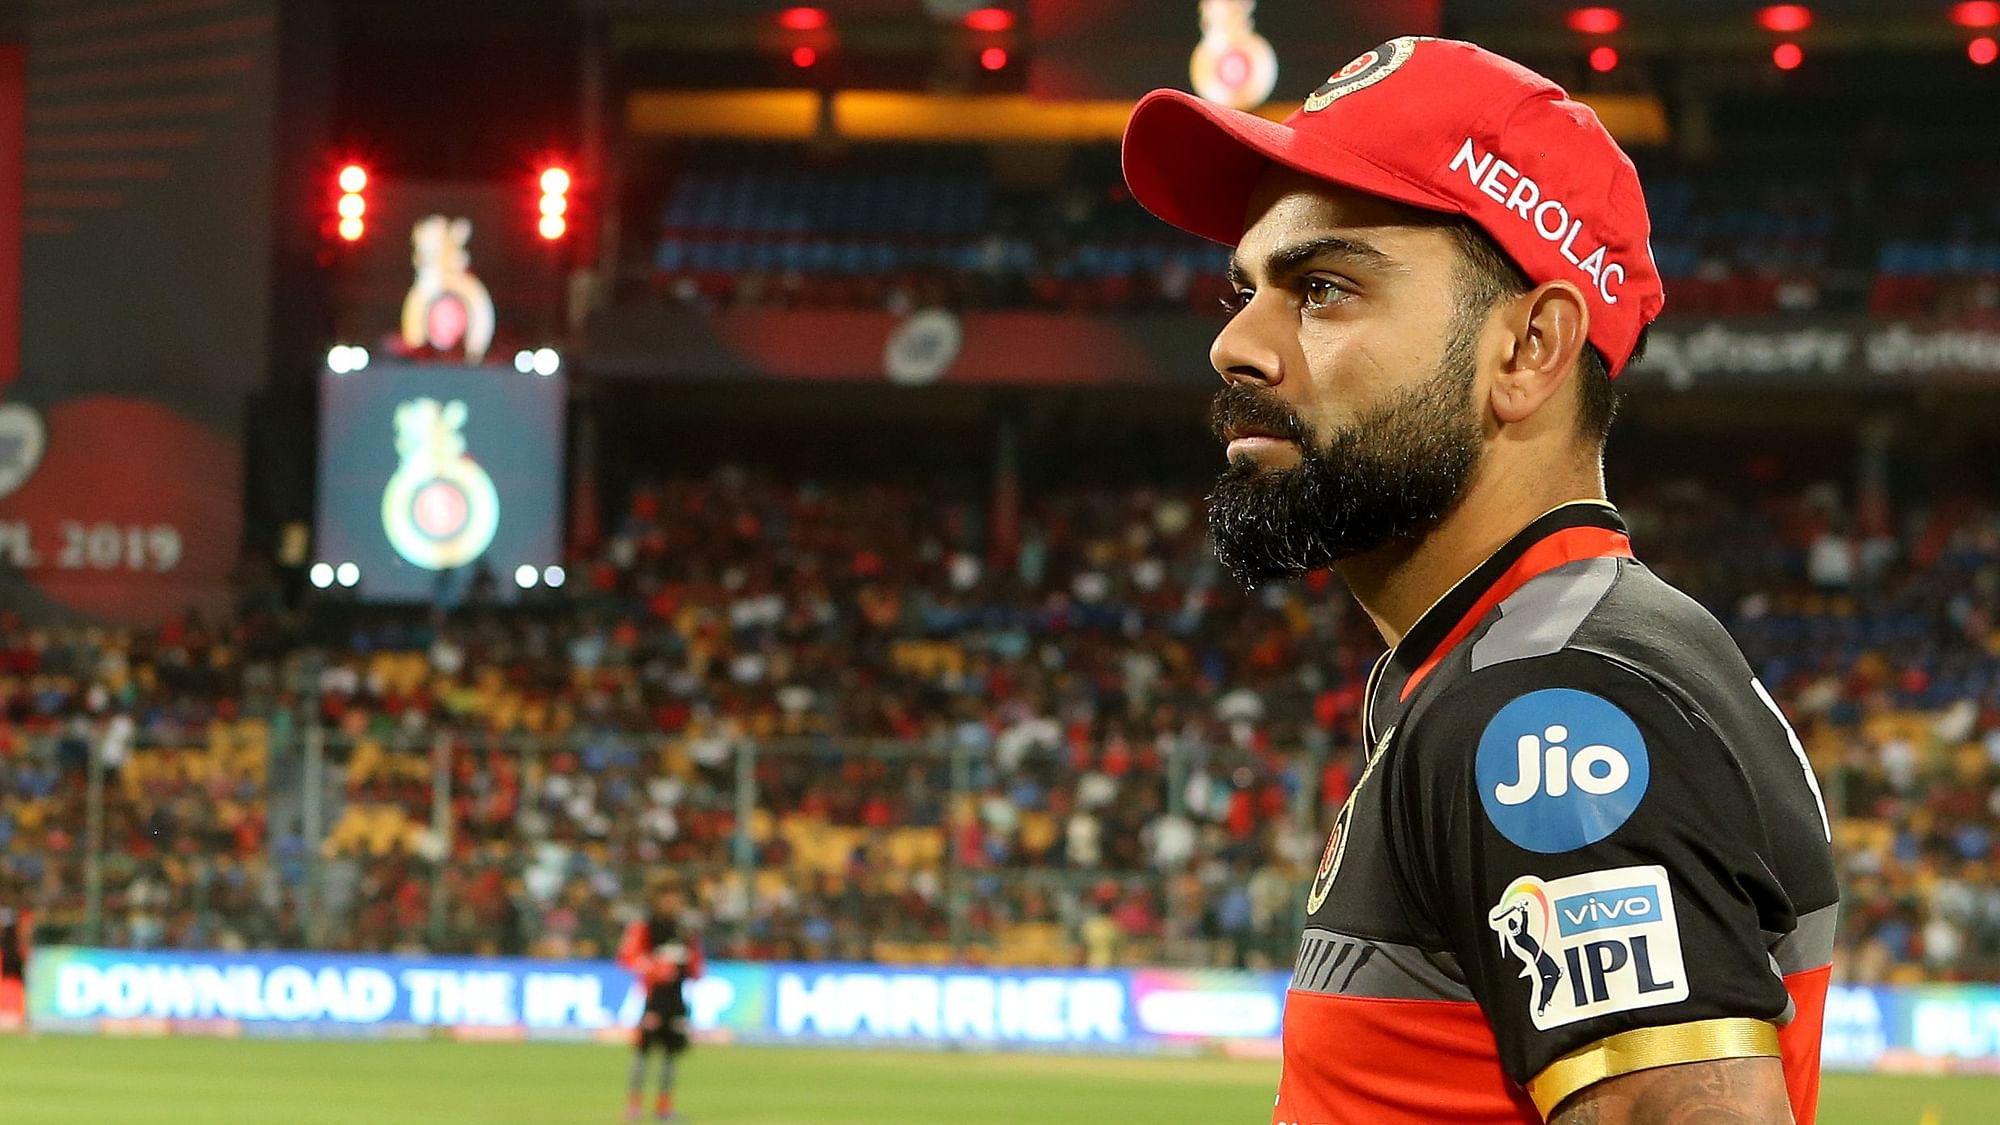 Virat Kohli’s RCB finished as the bottom-placed team in the 2019 IPL standings.